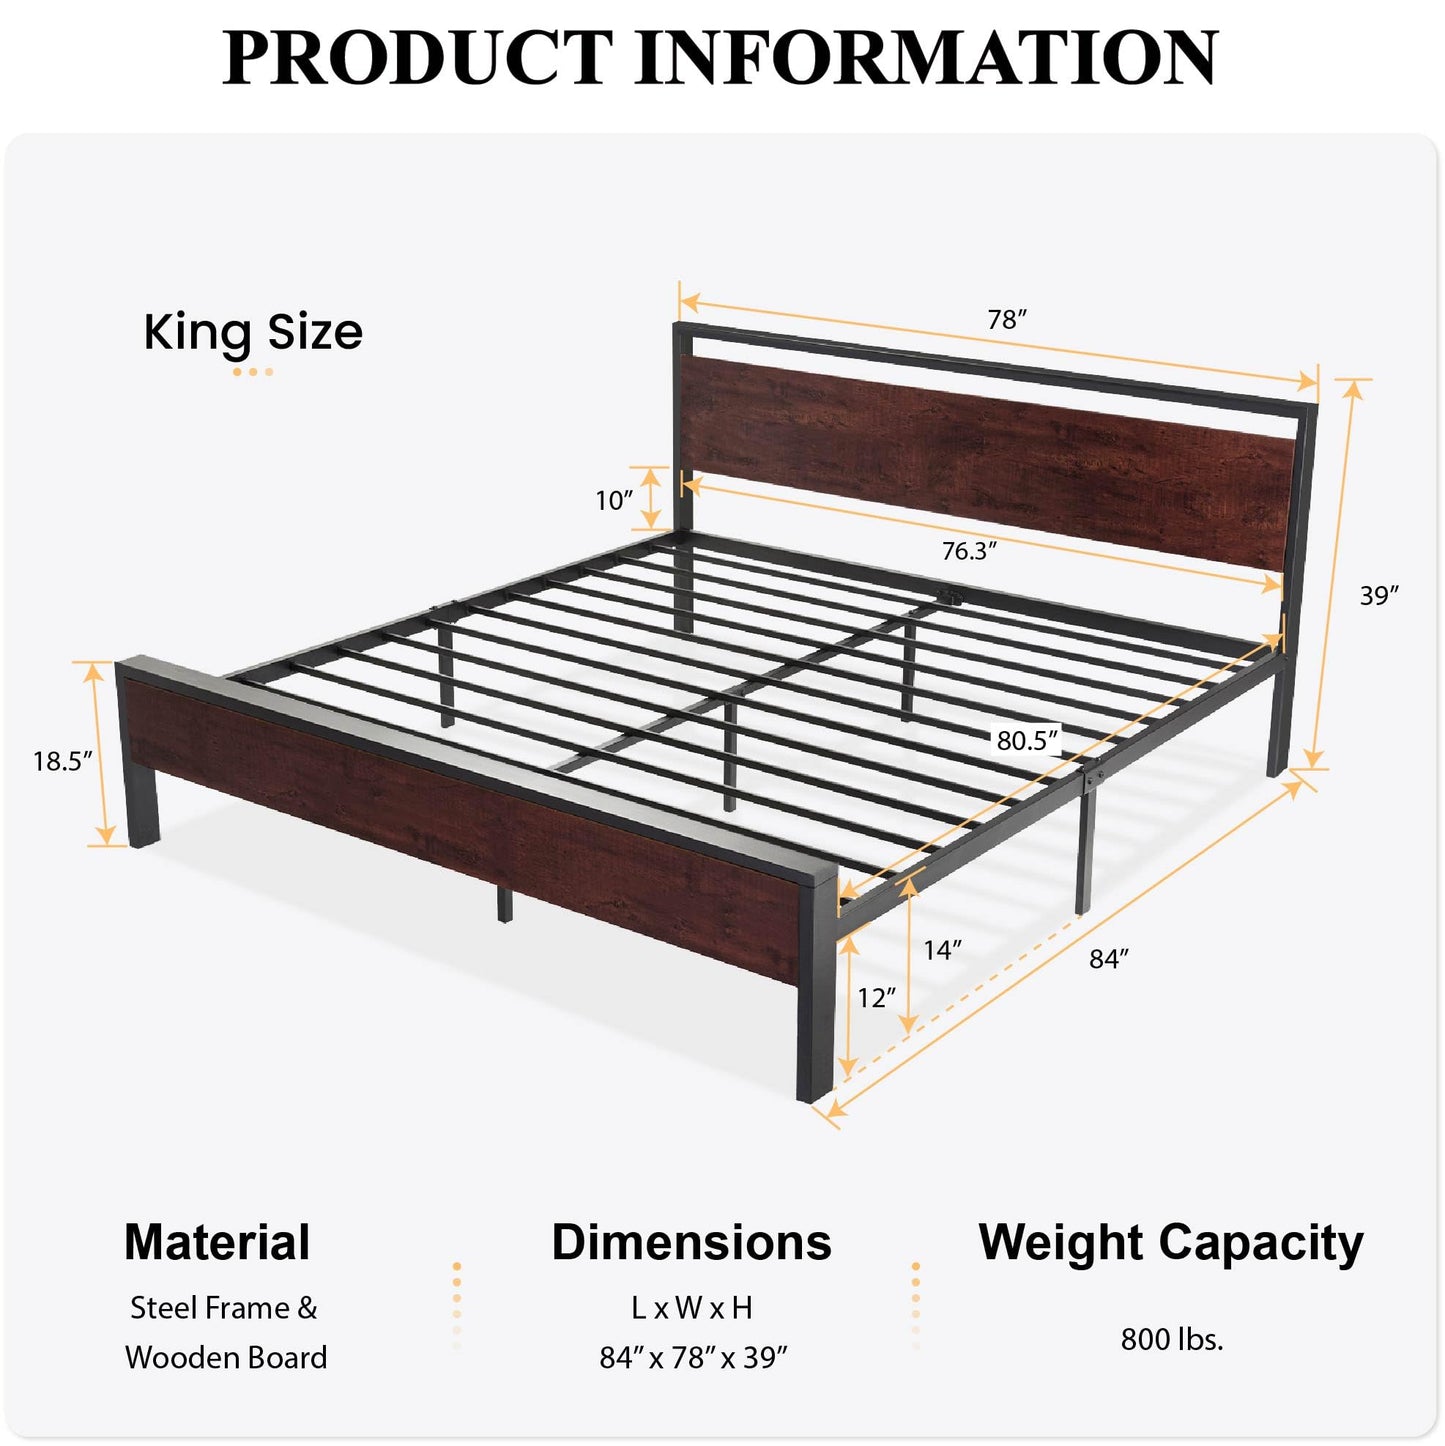 SHA CERLIN 14 Inch King Size Metal Platform Bed Frame with Wooden Headboard and Footboard, Mattress Foundation, No Box Spring Needed, Large Under Bed Storage, Mahogany